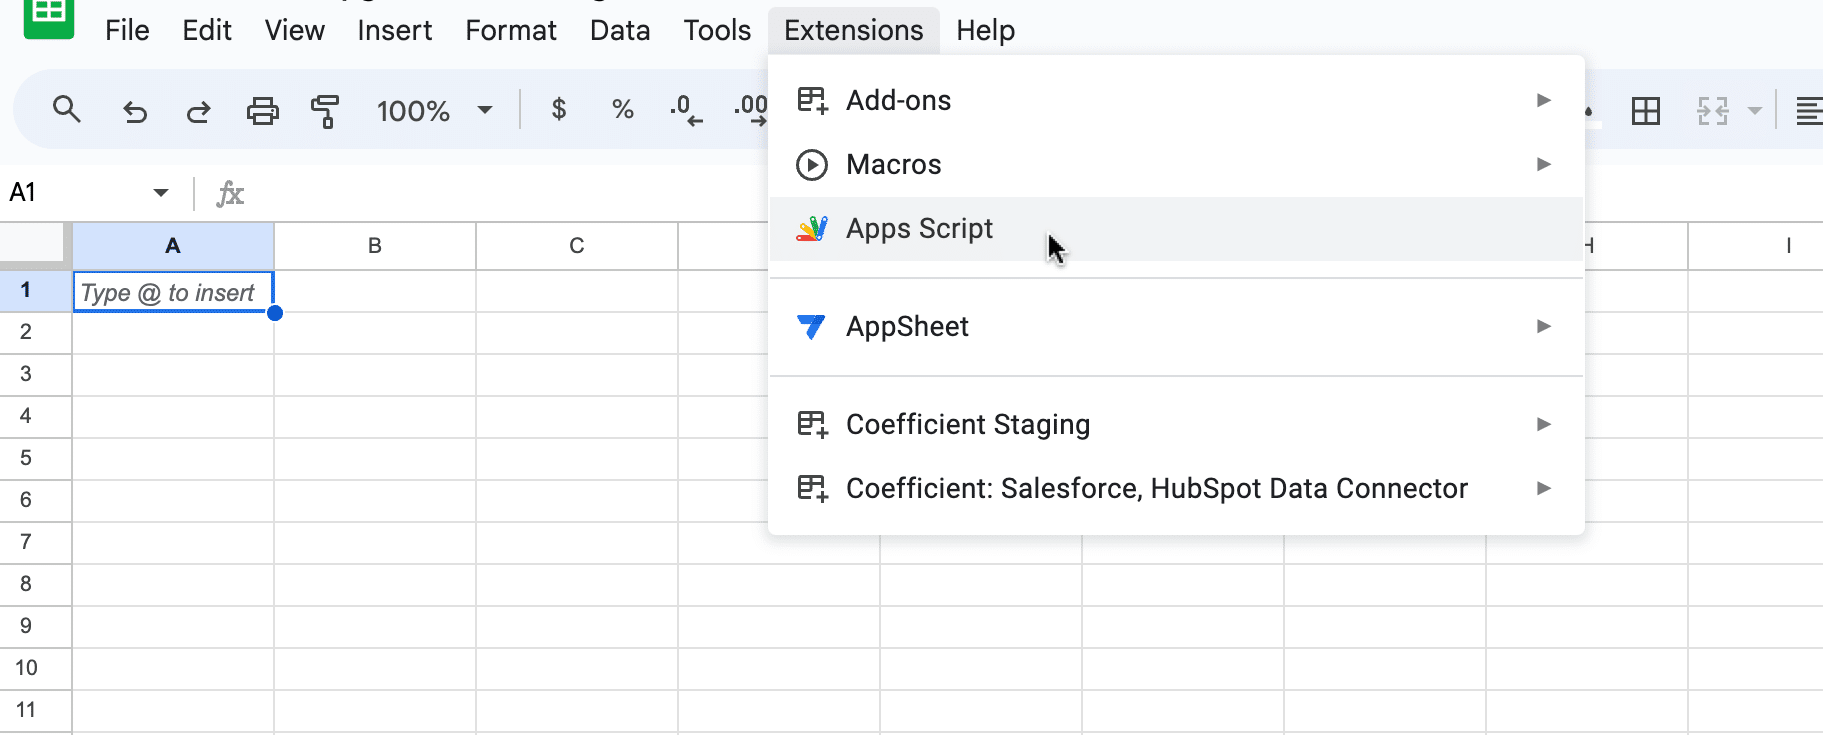 Accessing the Apps Script editor from the Google Sheets Extensions menu